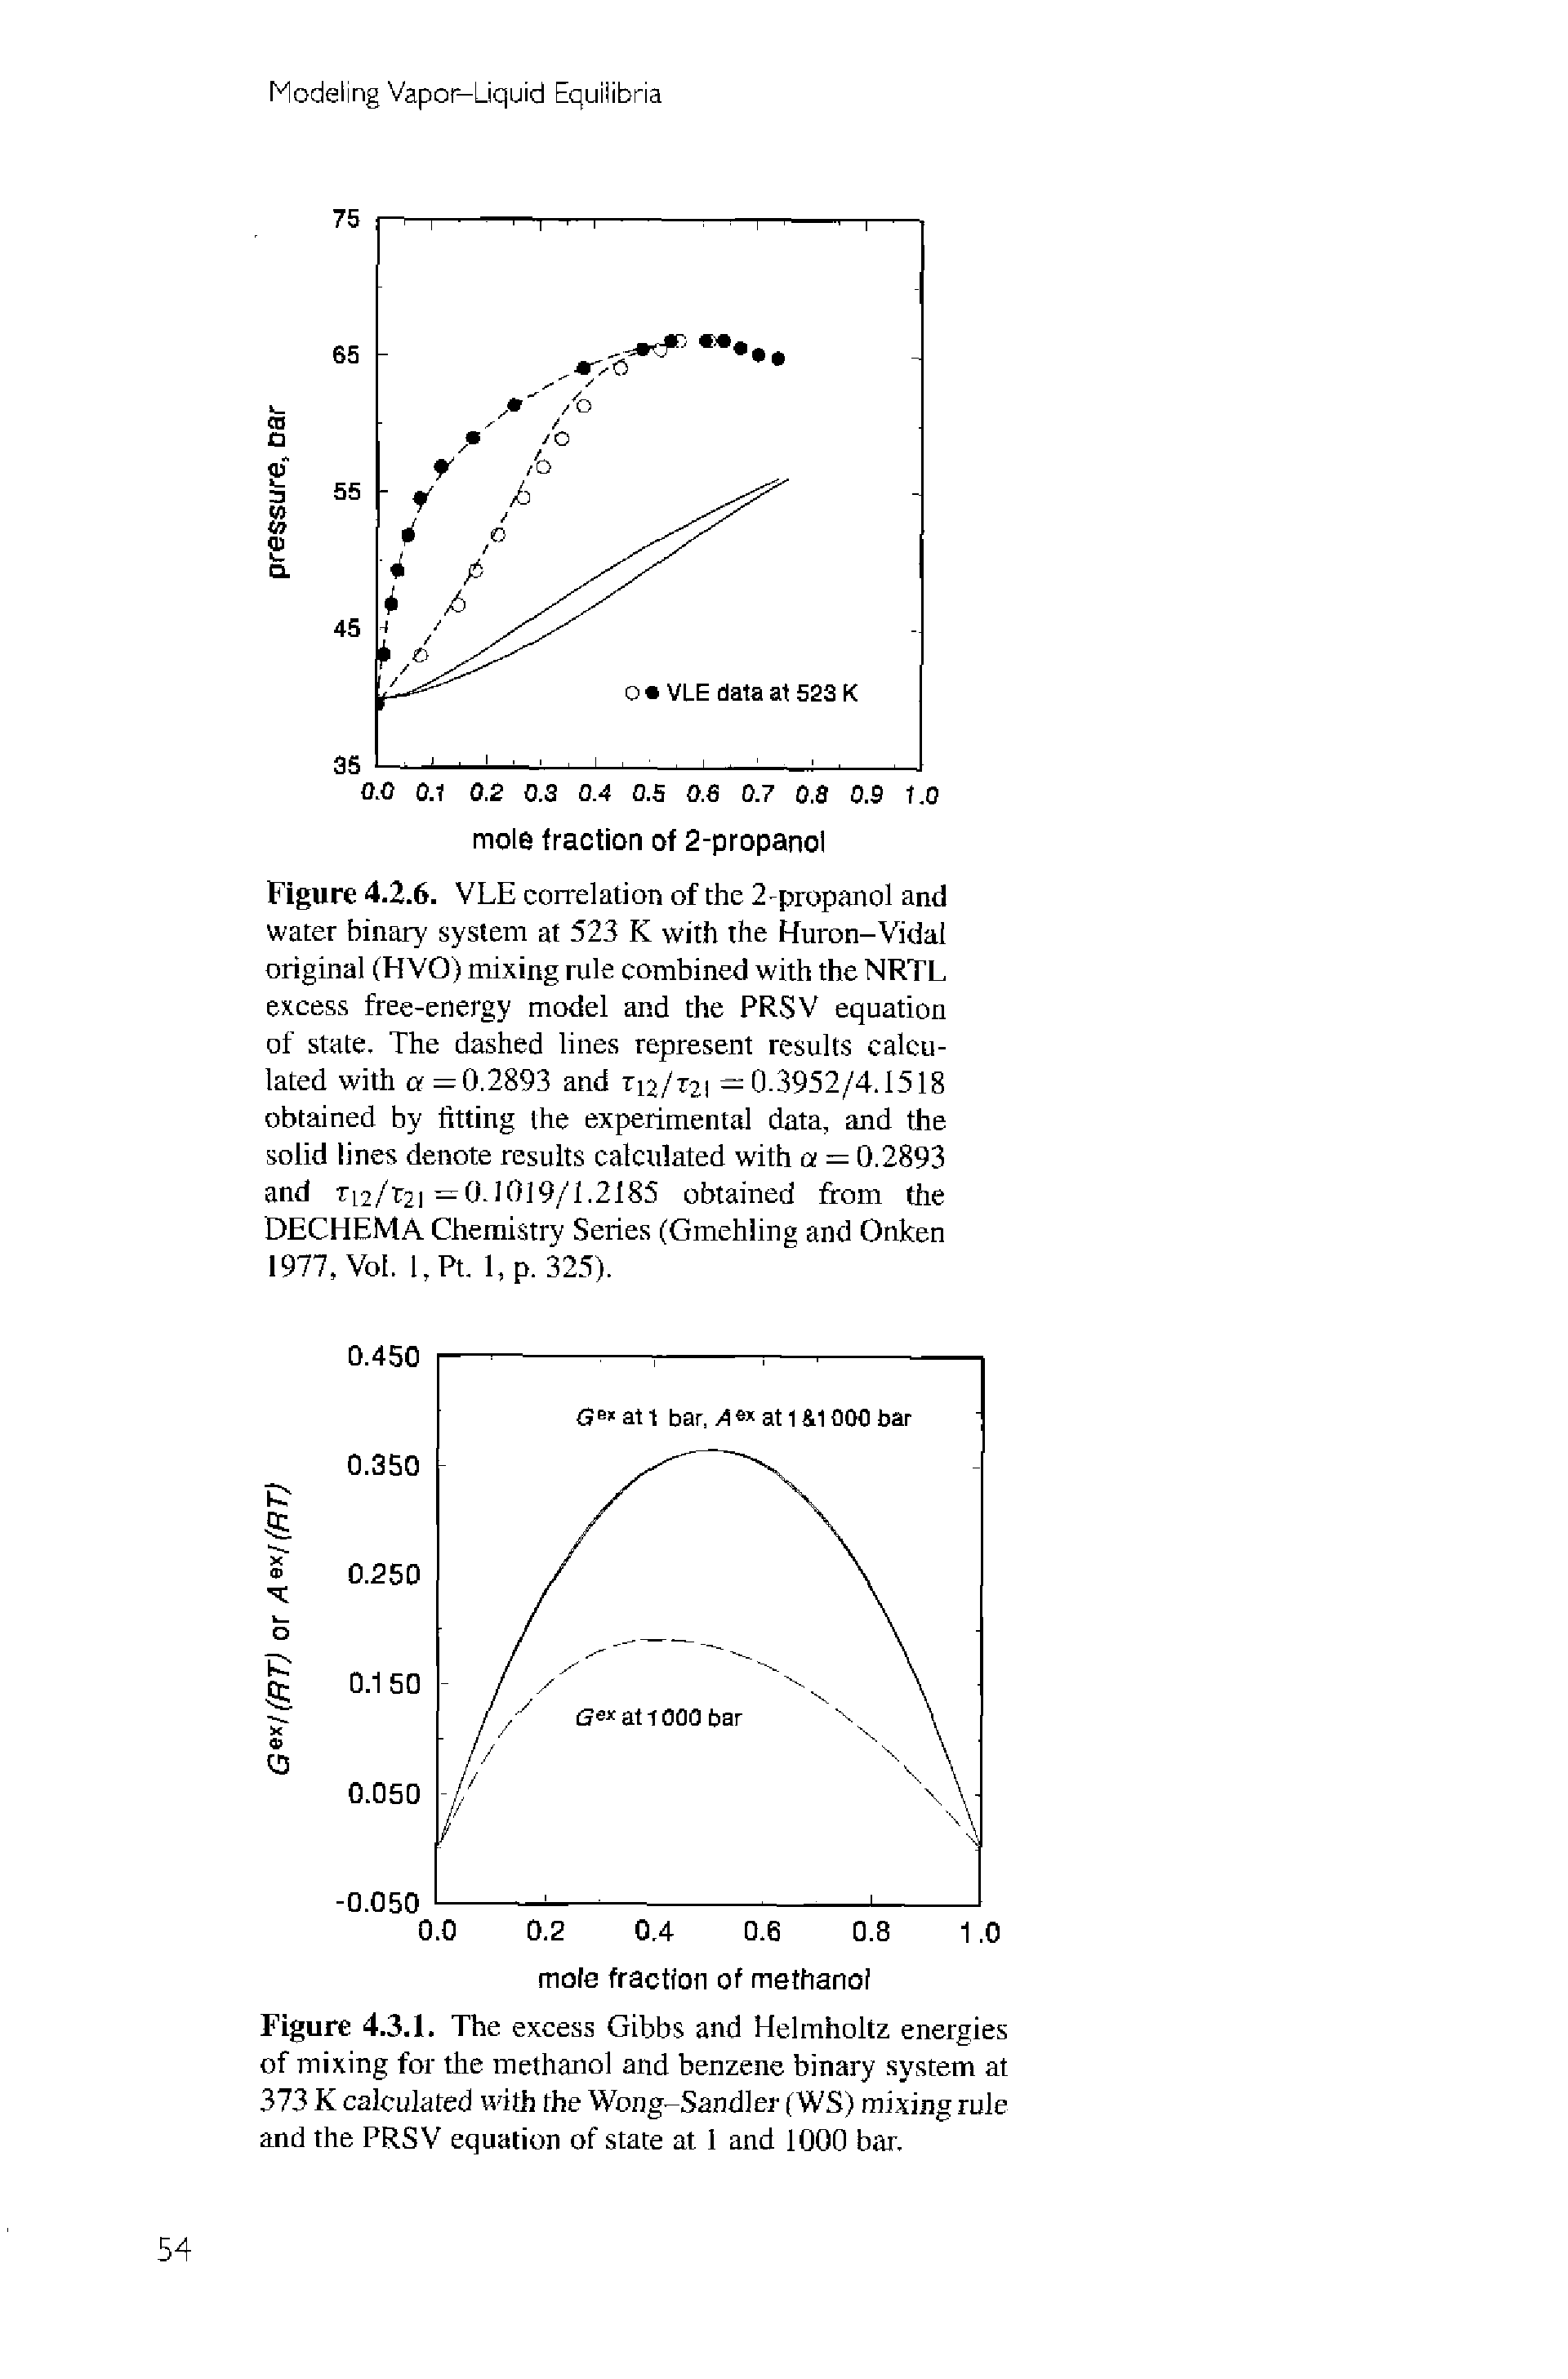 Figure 4.3.1. The excess Gibbs and Helmholtz energies of mixing for the methanol and benzene binary system at 373 K calculated u ith the Wong-Sandler fWS) mixing rule and the PRSV equation of state at 1 and 1000 bar.